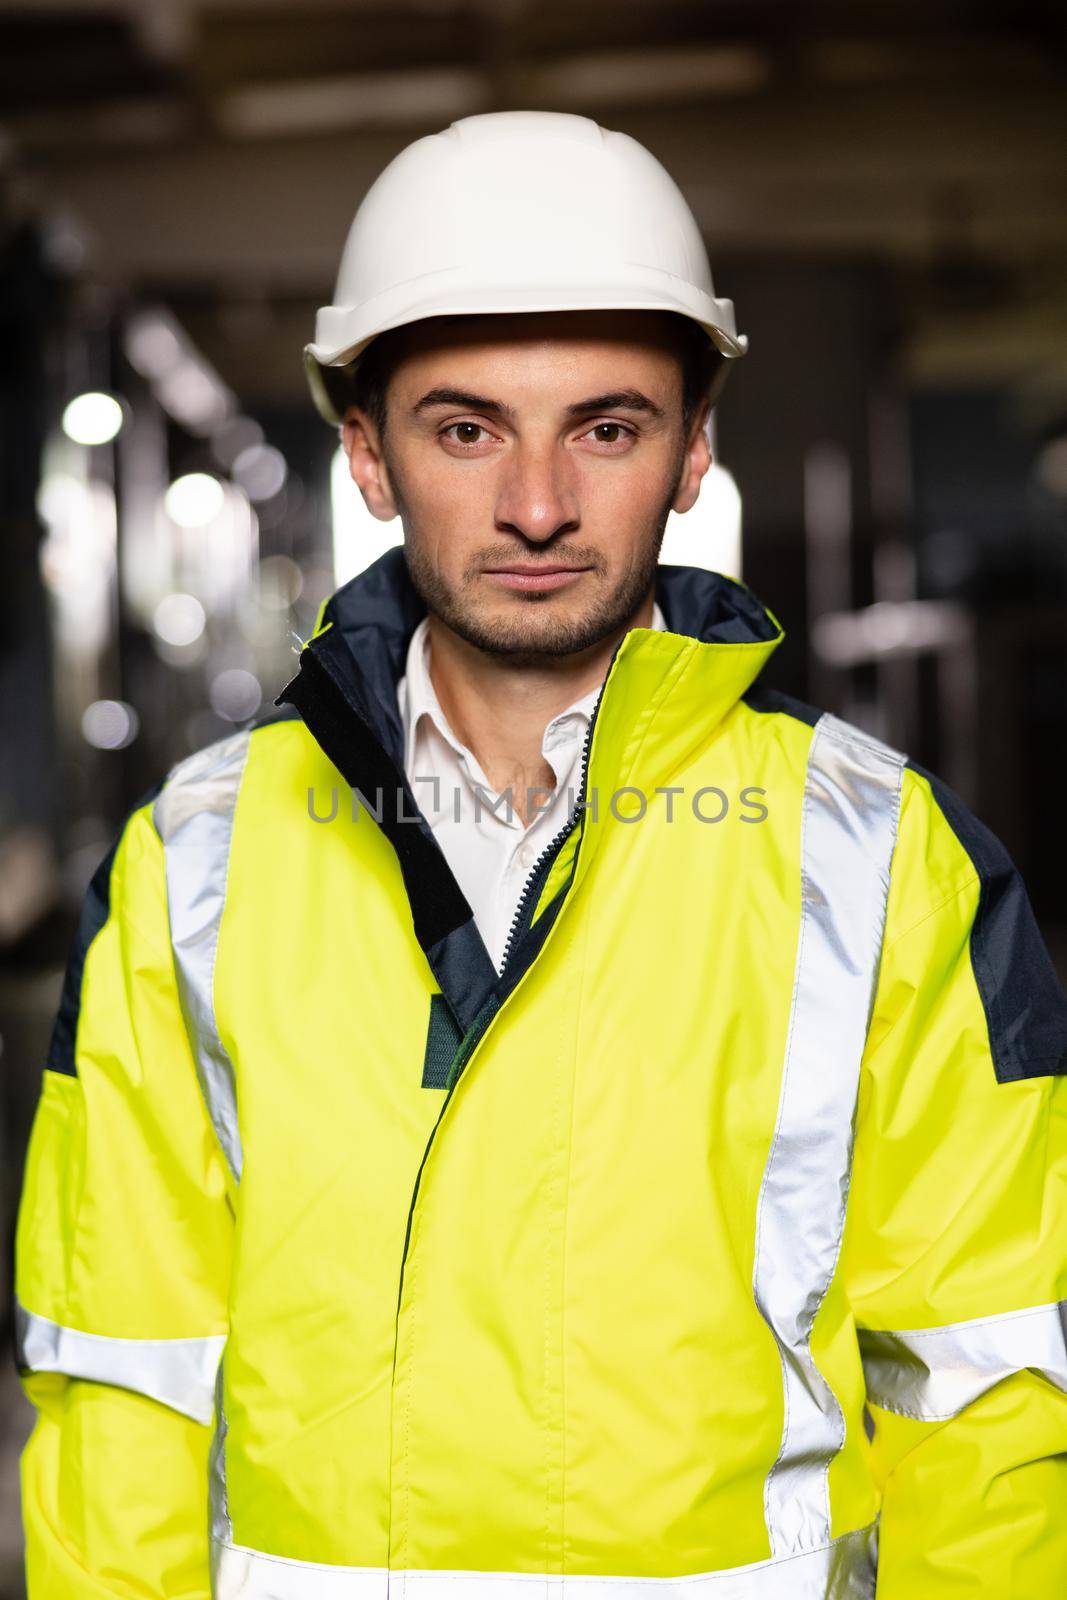 Caucasian business people in hard hat or safety wear. Professional male industry engineer specialist. Portrait of a frontline essential worker in a warehouse by uflypro